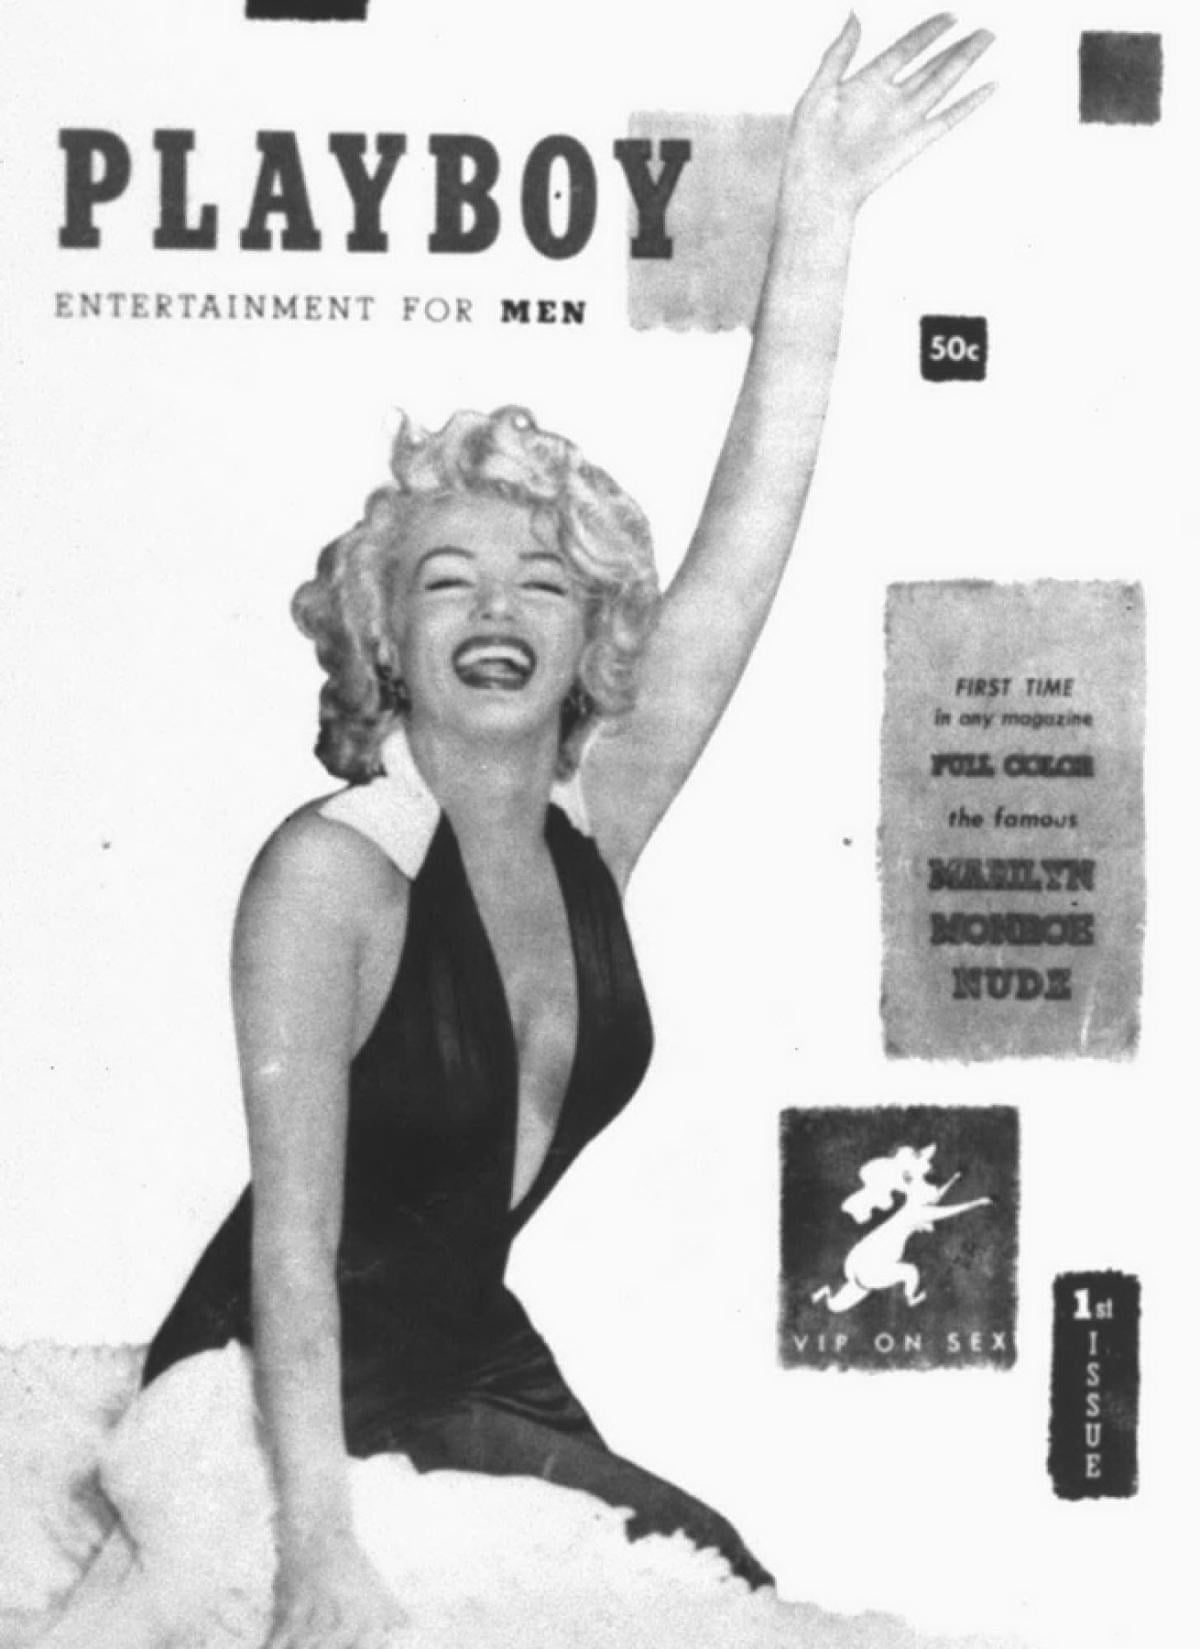 a-history-of-playboy-magazine-covers-in-pictures-media-the-guardian